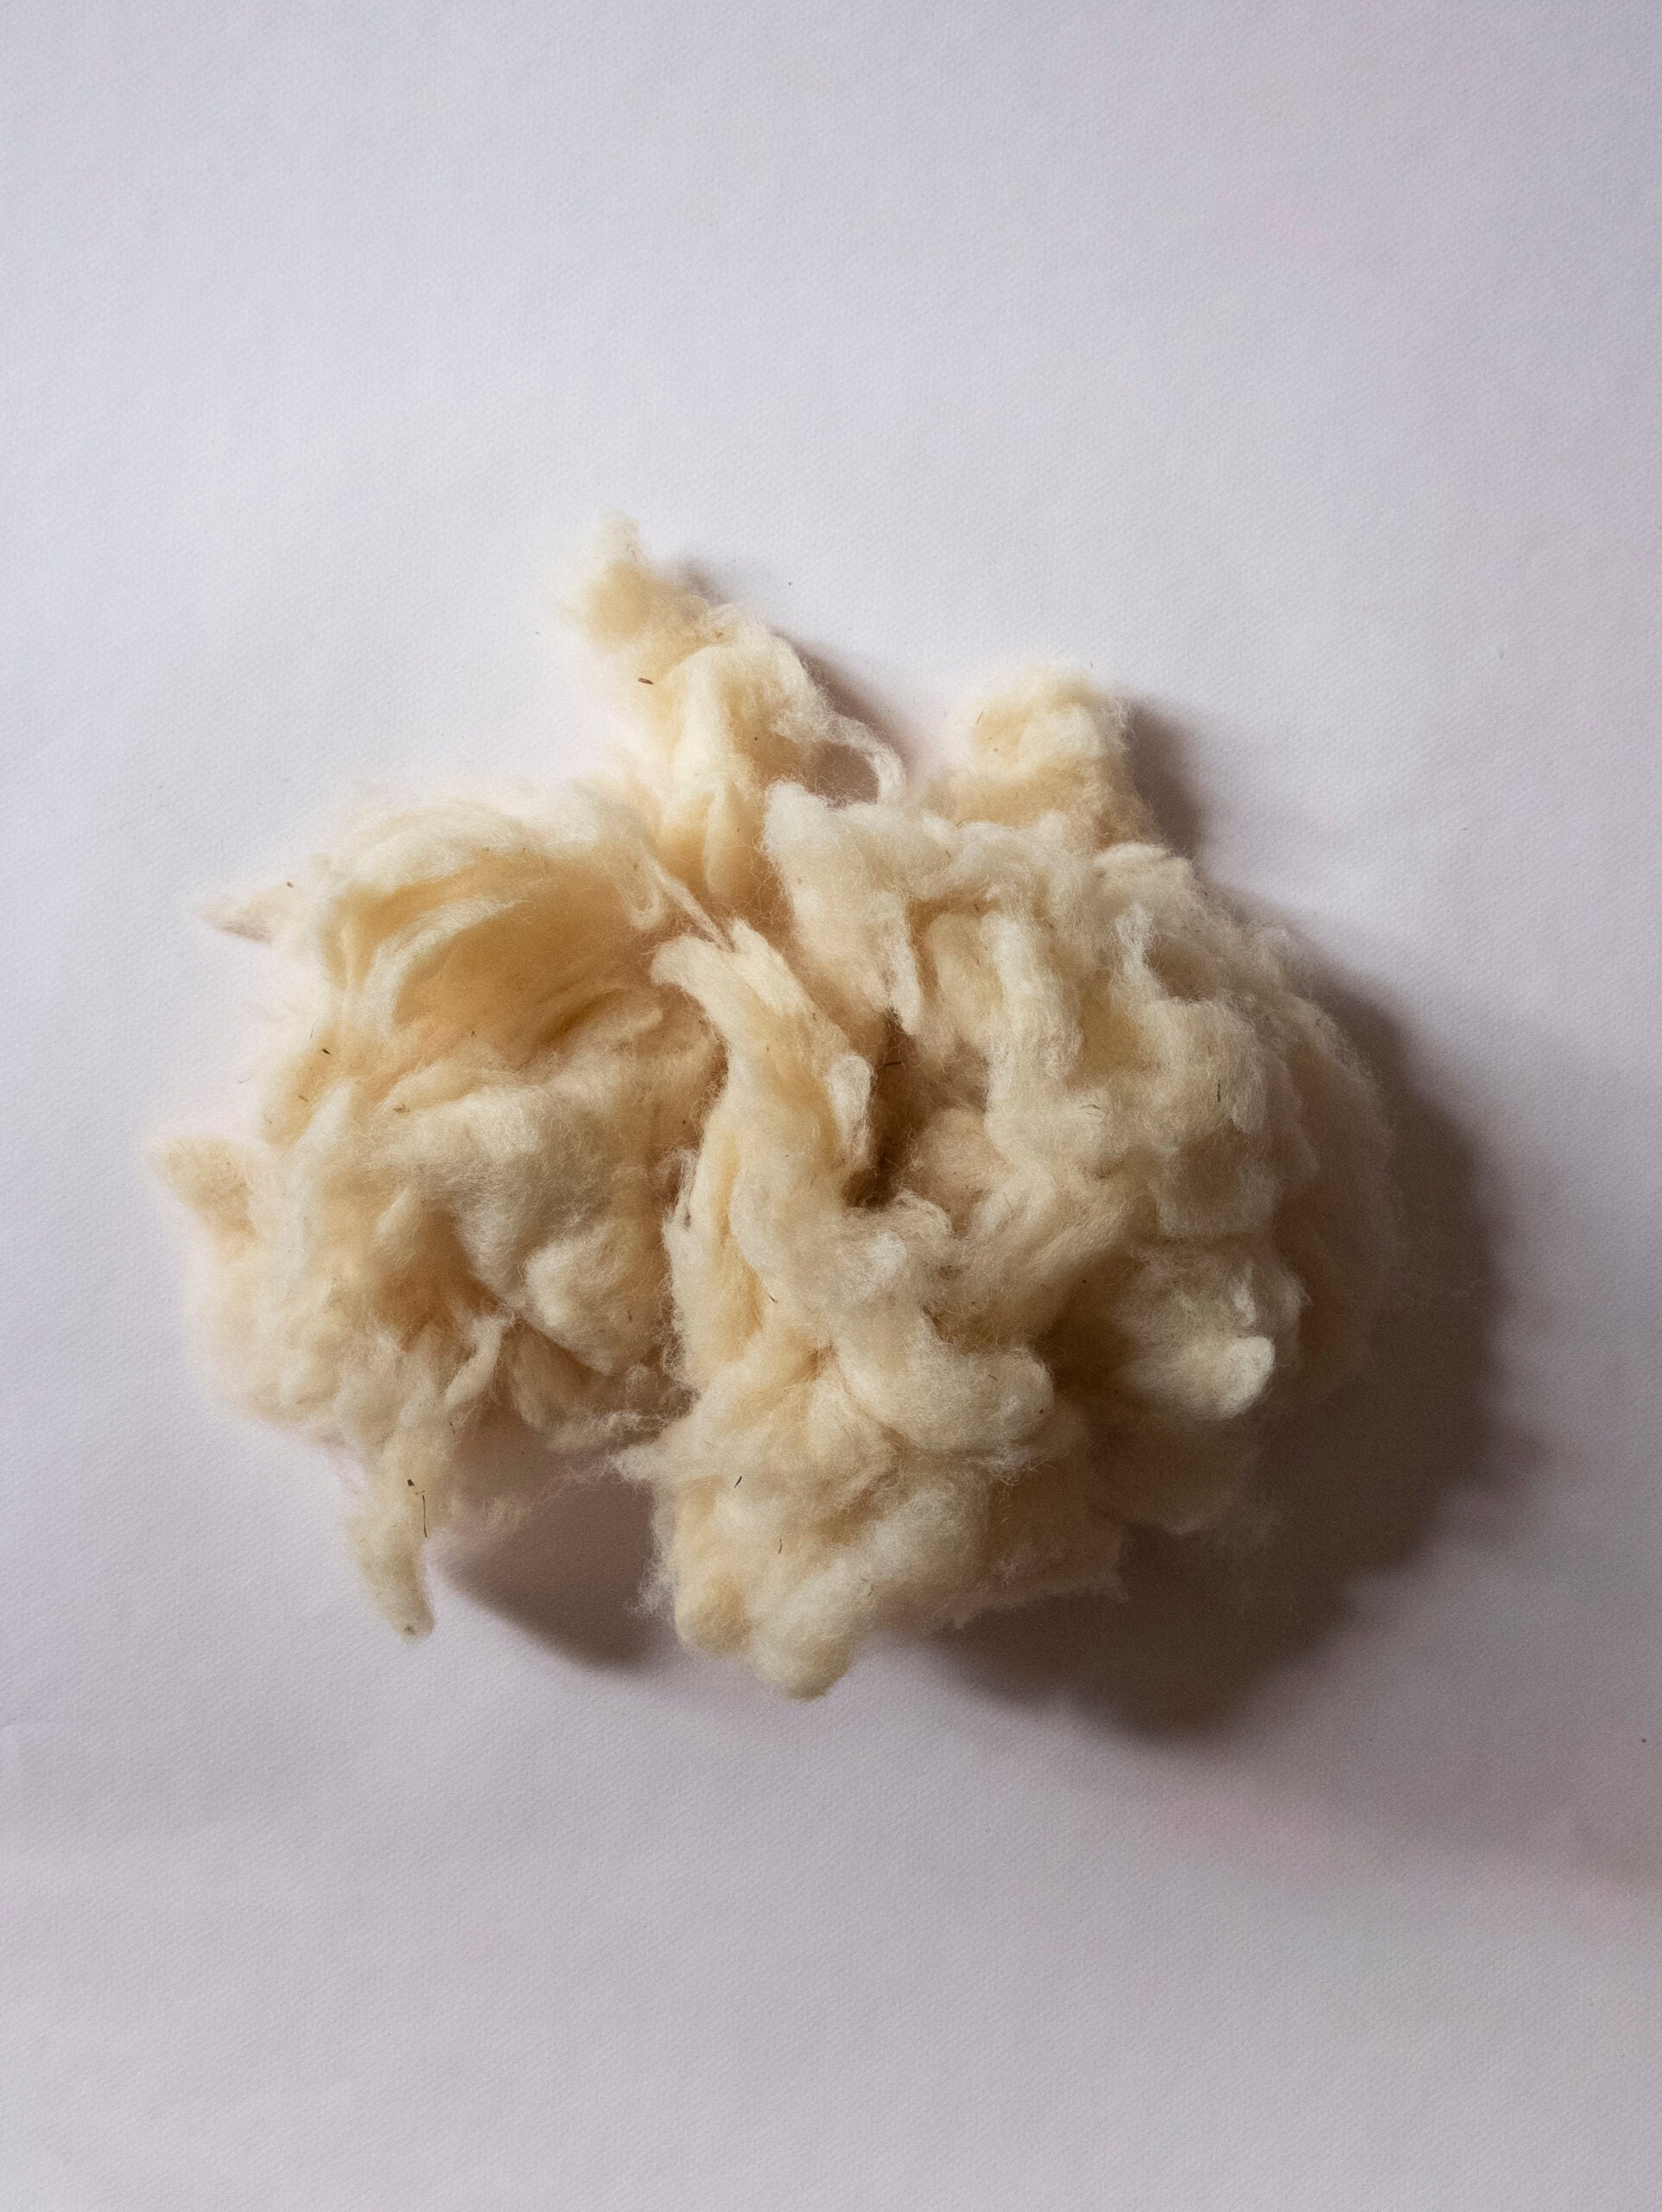 wool for stuffing